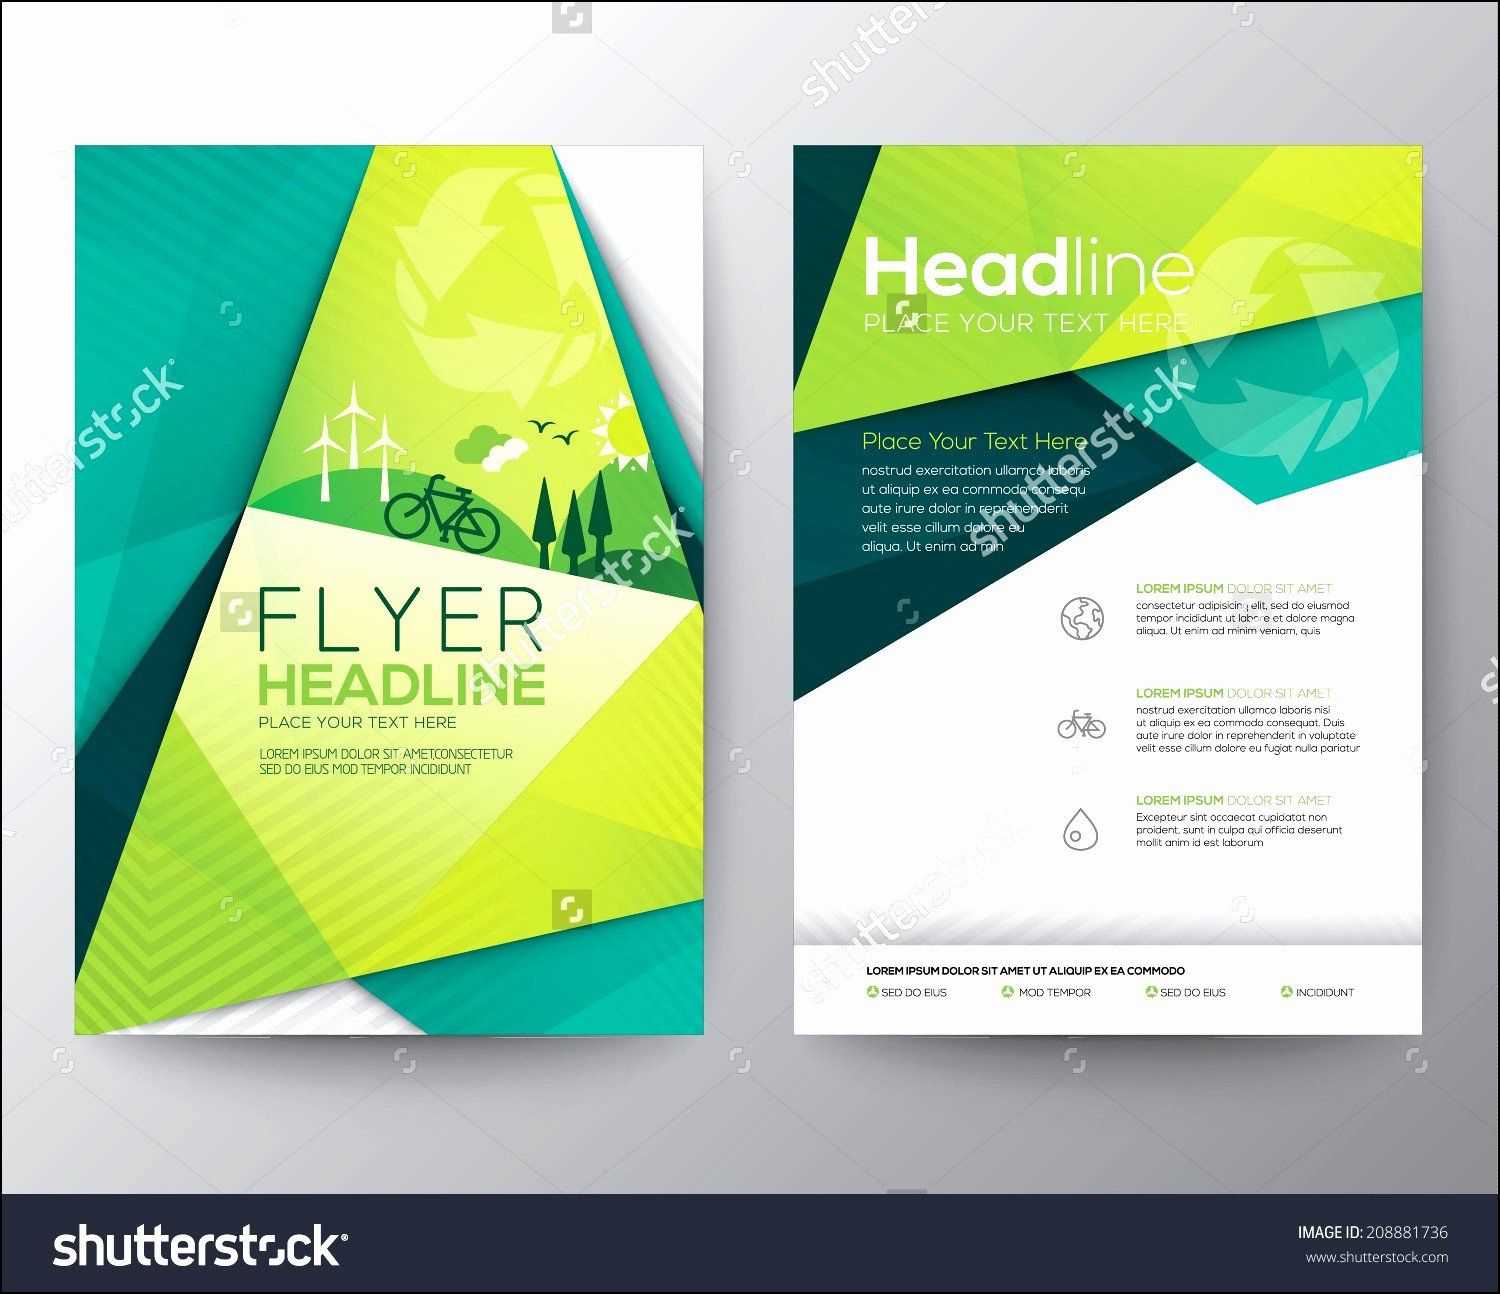 011 Template Ideas Free Downloadable Flyer Beautiful For Free Downloadable Templates For Flyers